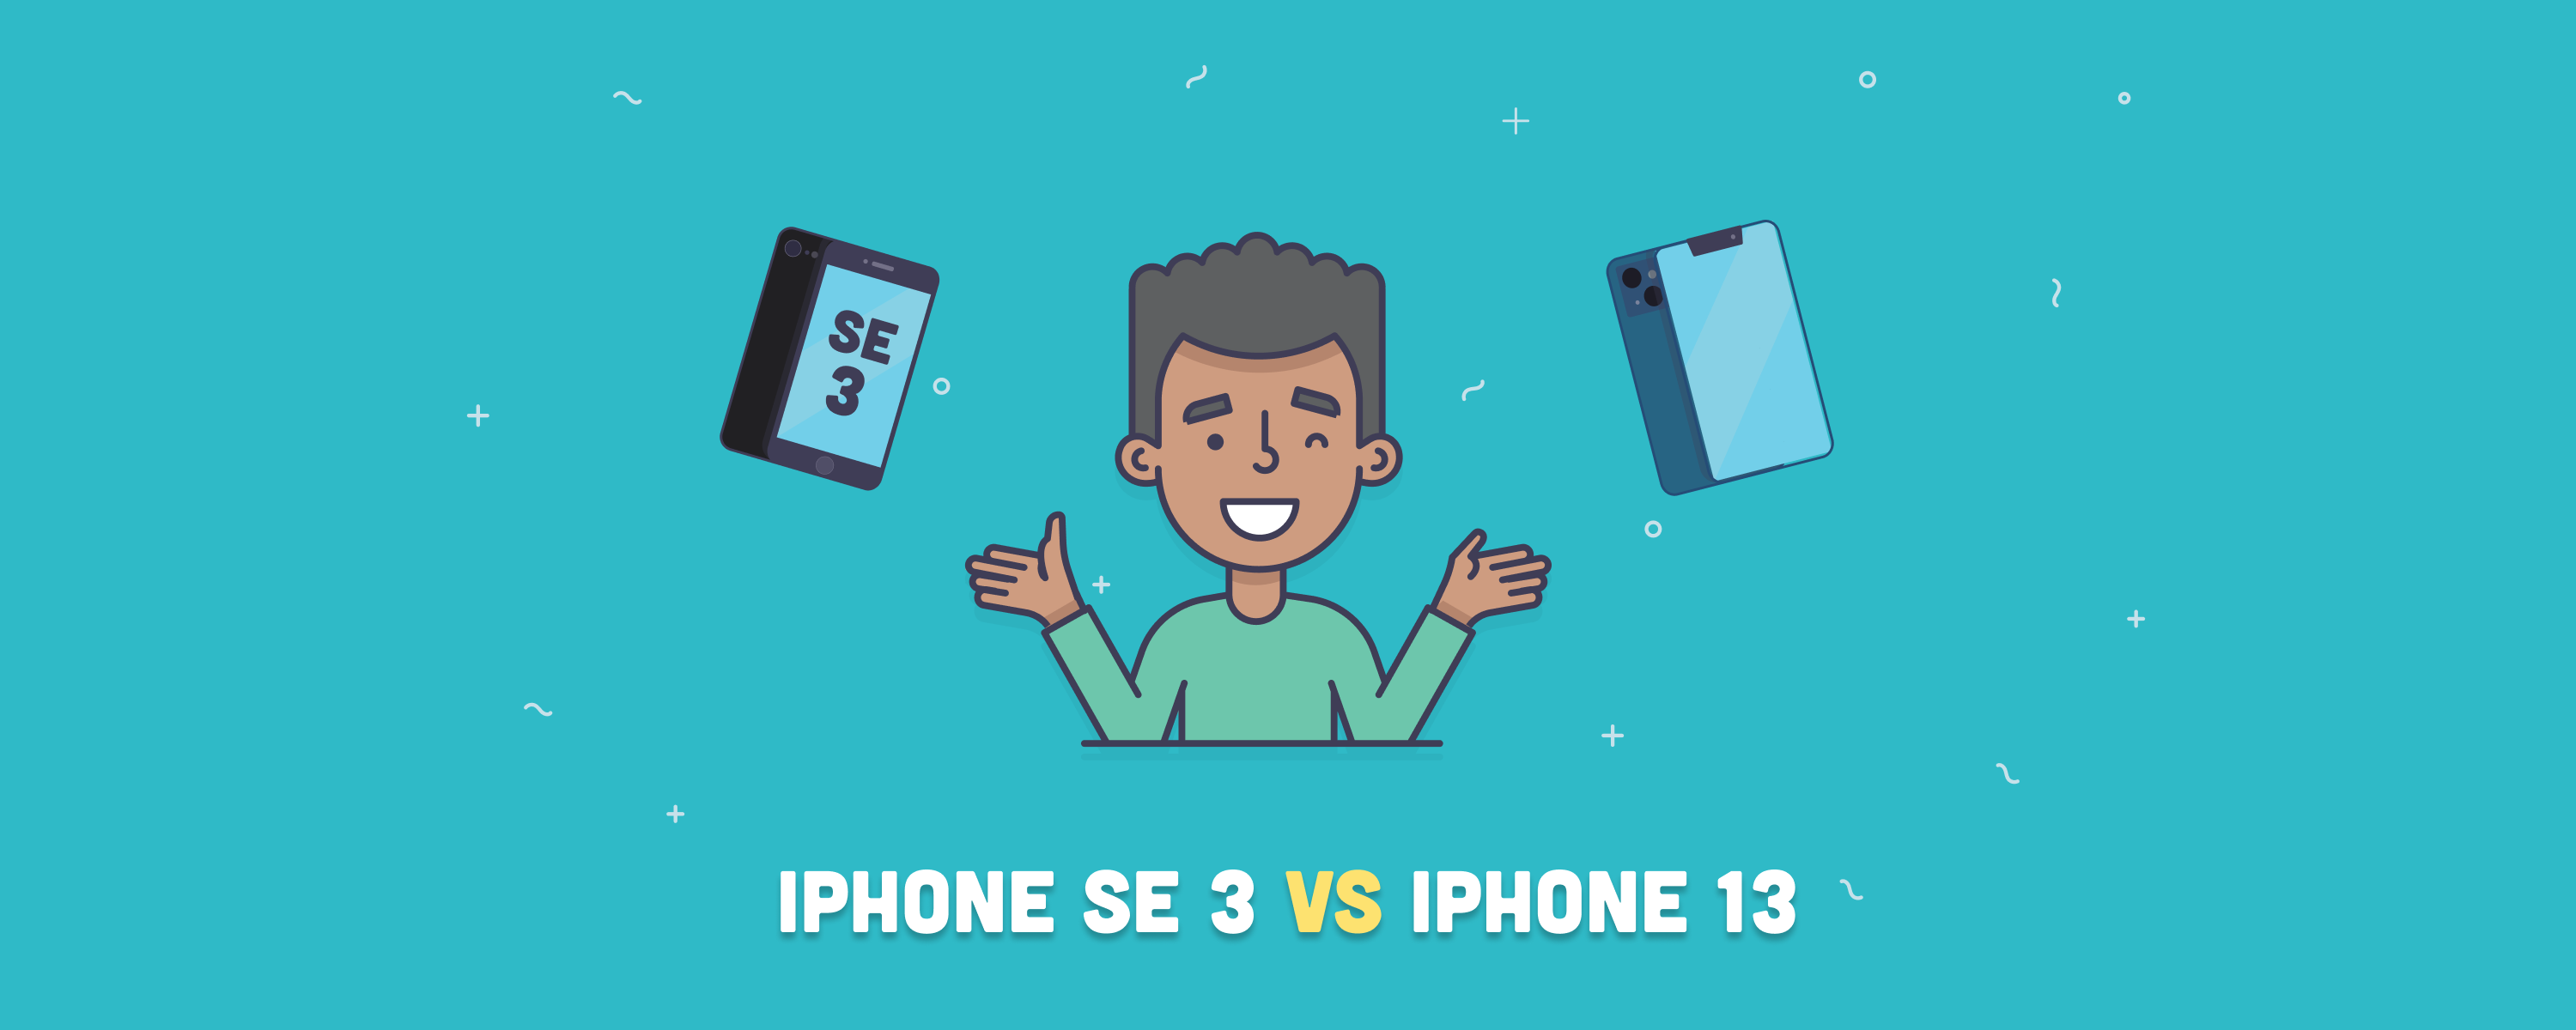 iPhone SE (2022) Vs. iPhone 12: Comparison Guide to Help You Decide